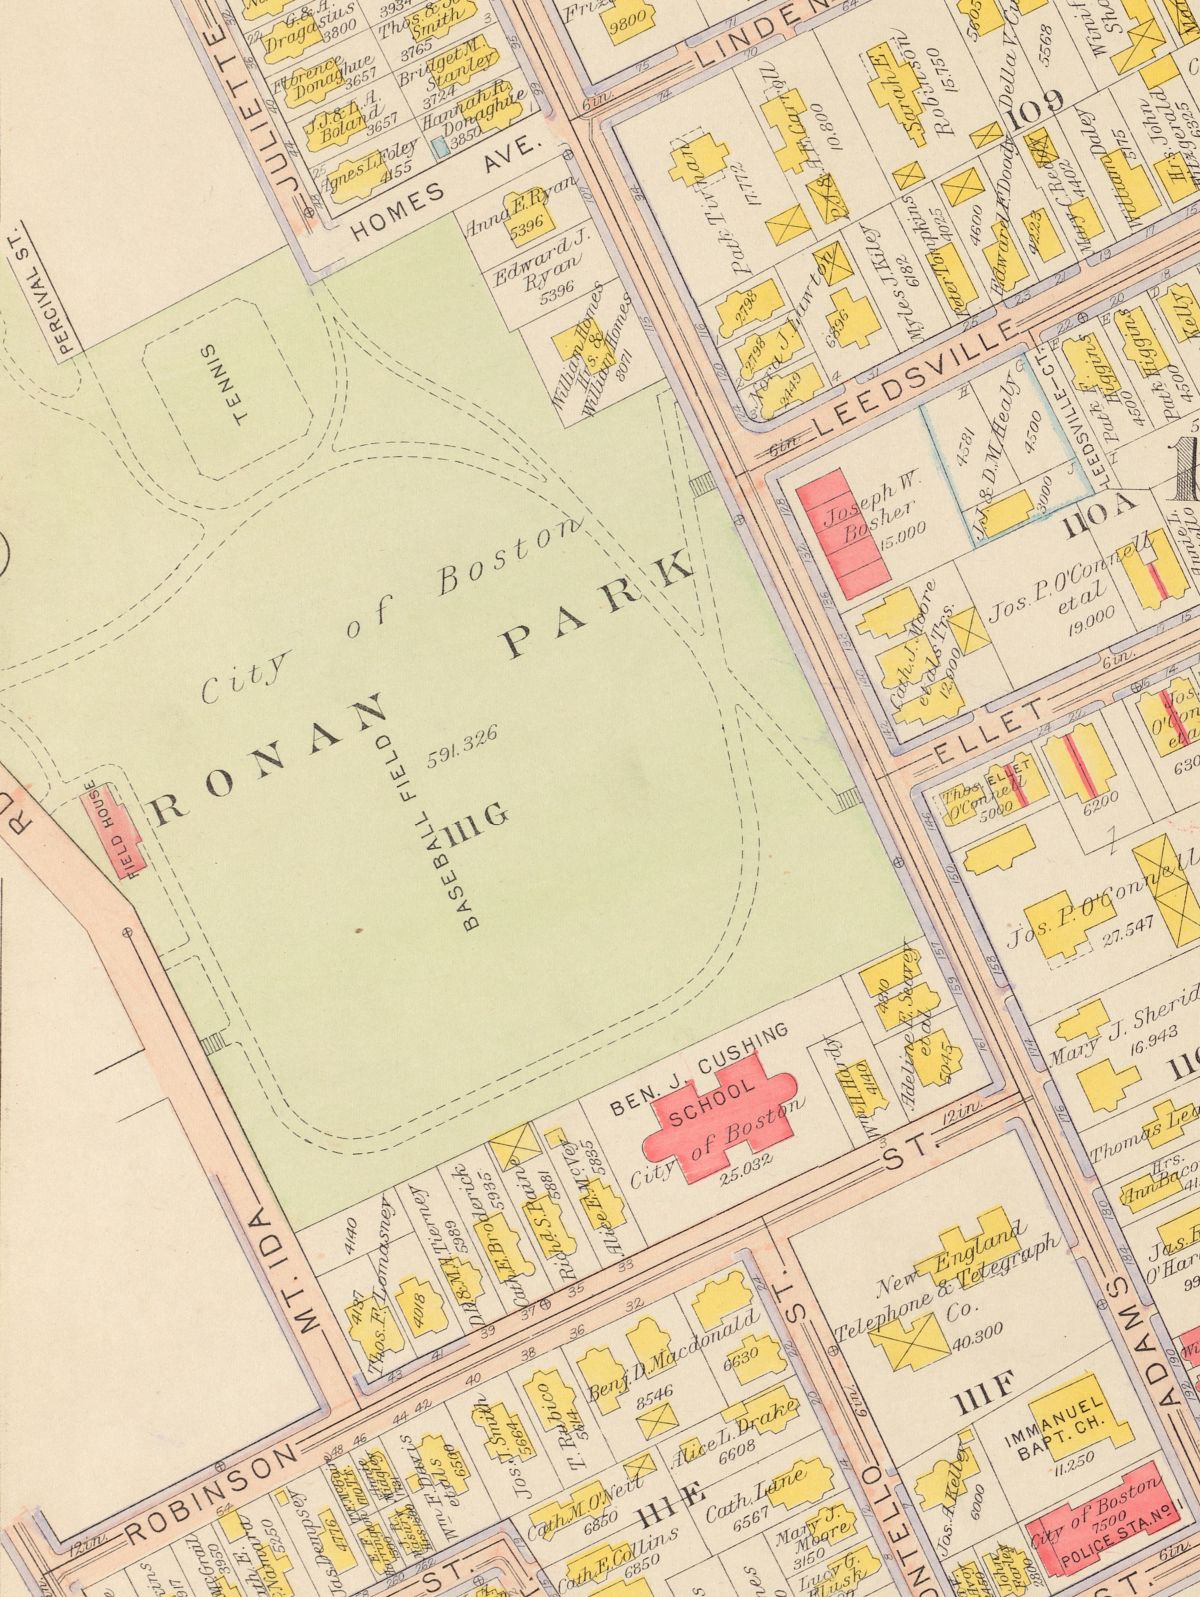 Ronan Park appears in urban atlases around 1918.